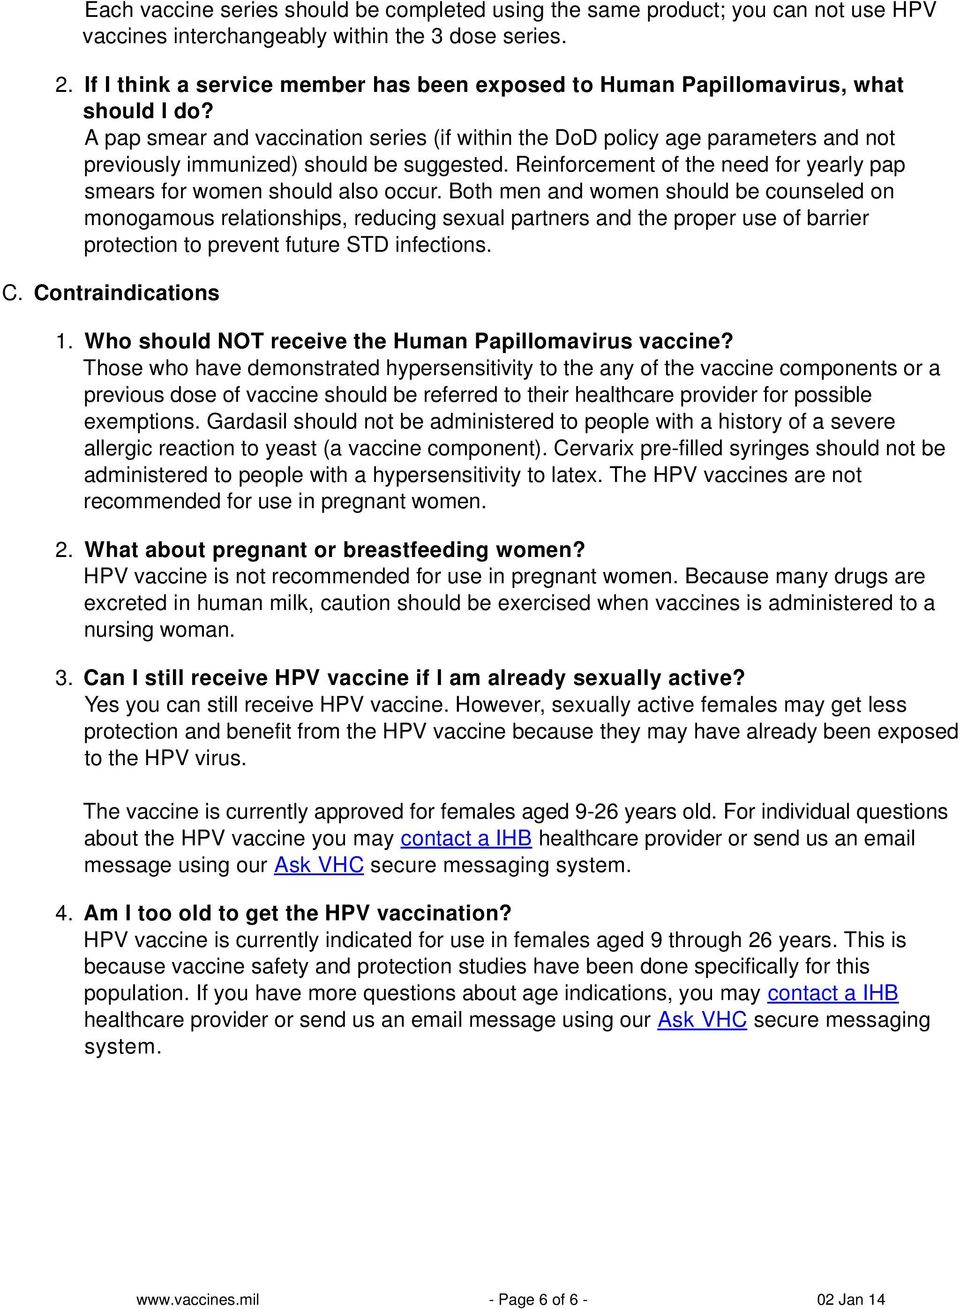 A pap smear and vaccination series (if within the DoD policy age parameters and not previously immunized) should be suggested.